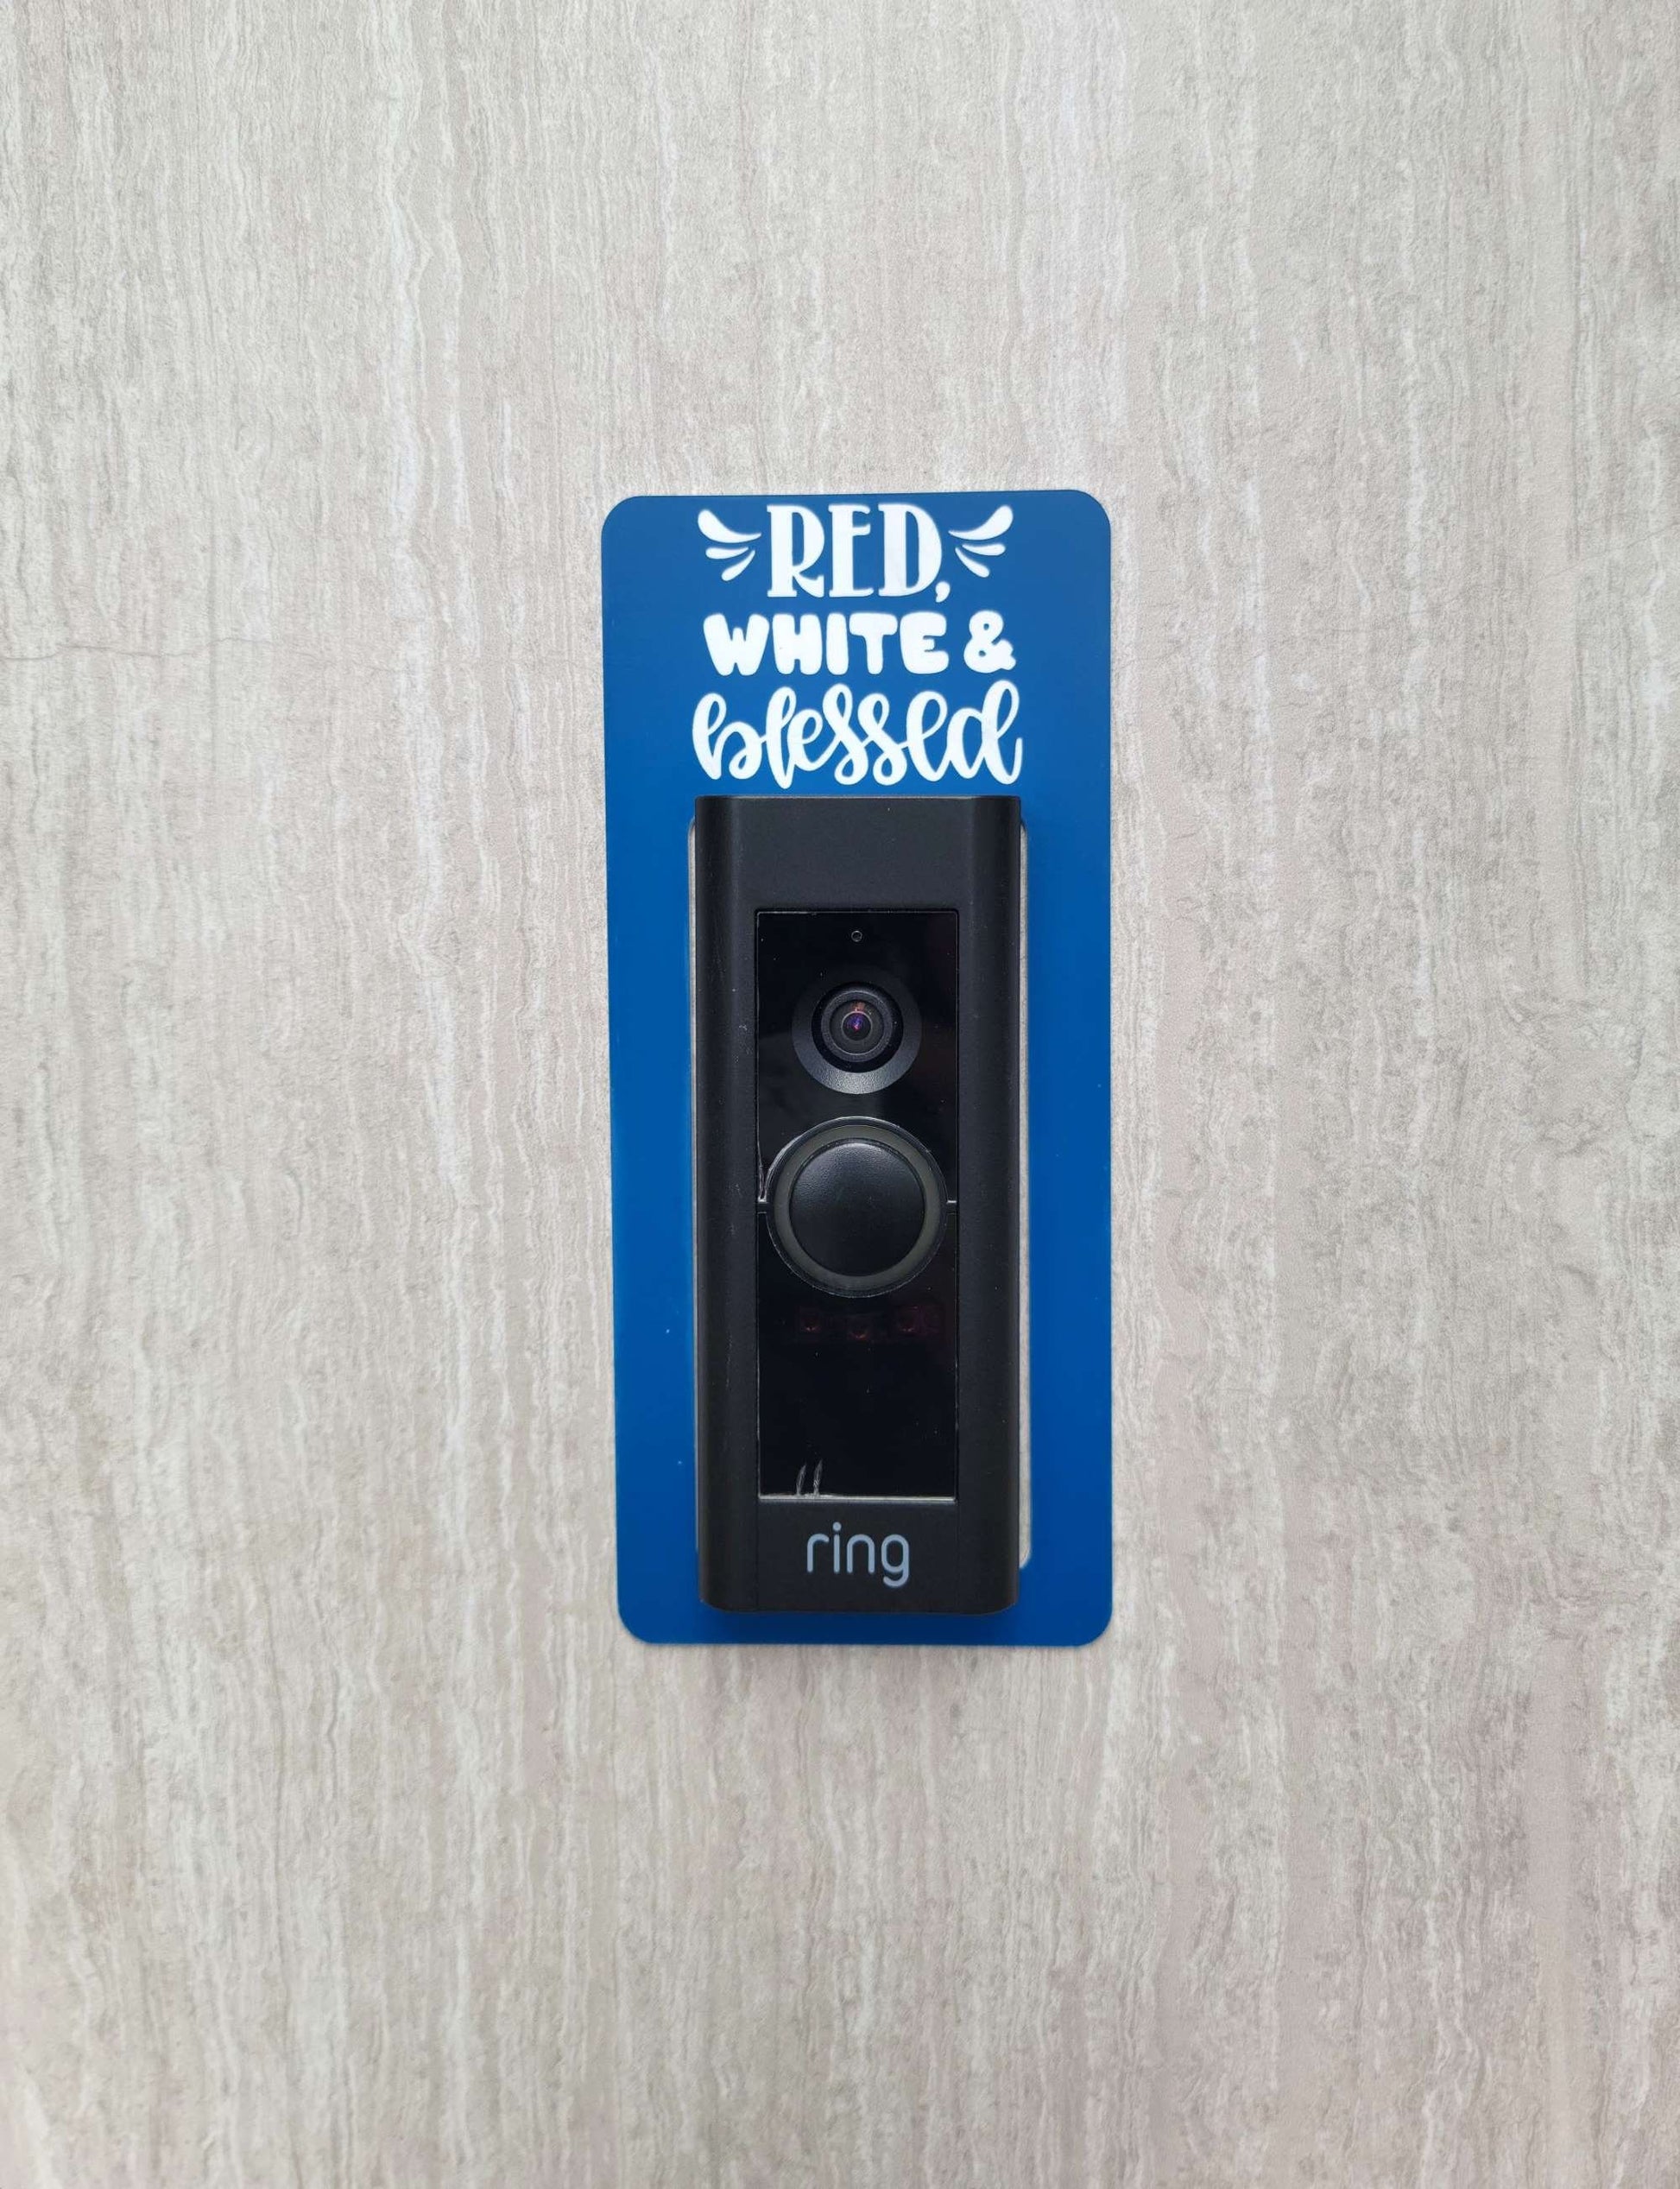 Blue laminate doorbell surround with white lettering stating red, white and blessed on gray background